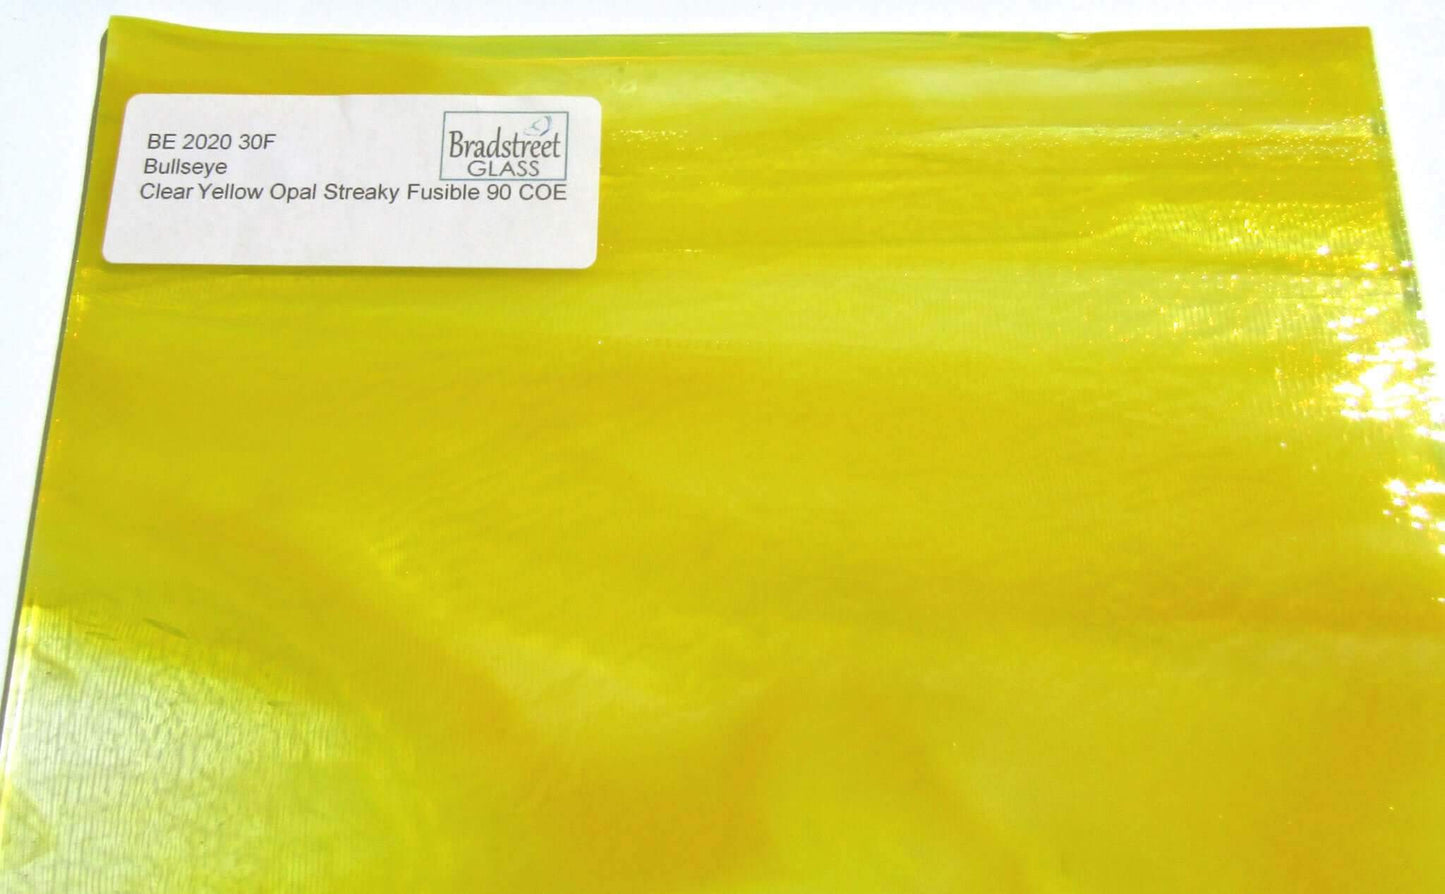 Clear Yellow Opal Fusible Stained Glass Sheet 90 COE Bullseye 2020 30F